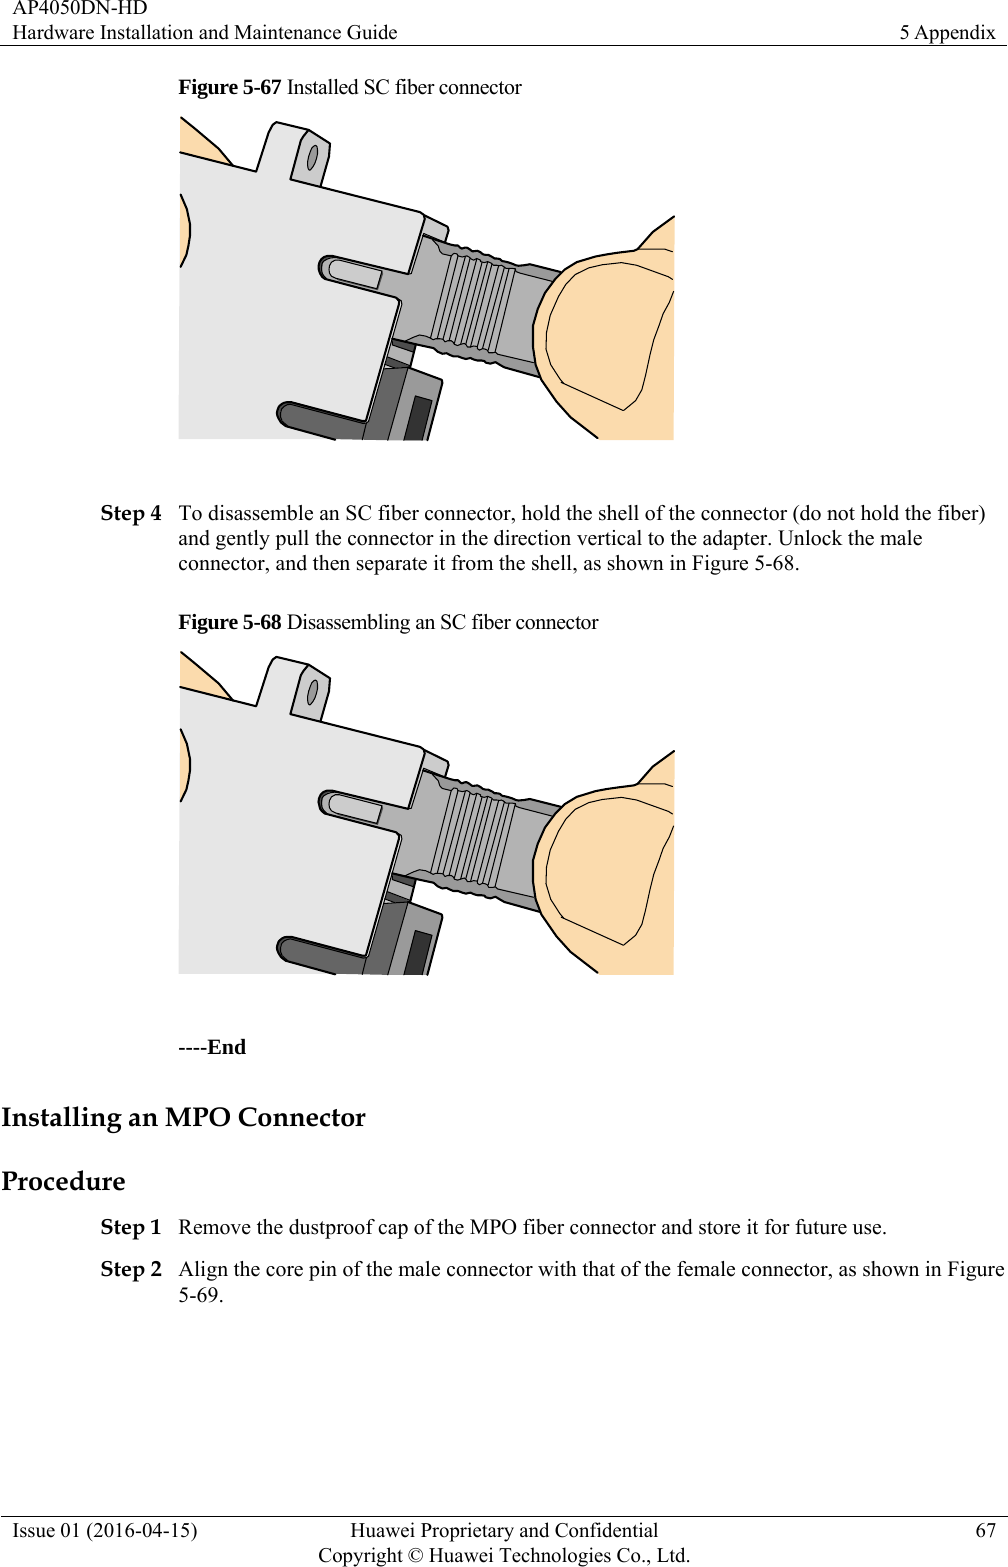 AP4050DN-HD Hardware Installation and Maintenance Guide  5 Appendix Issue 01 (2016-04-15)  Huawei Proprietary and Confidential         Copyright © Huawei Technologies Co., Ltd.67 Figure 5-67 Installed SC fiber connector   Step 4 To disassemble an SC fiber connector, hold the shell of the connector (do not hold the fiber) and gently pull the connector in the direction vertical to the adapter. Unlock the male connector, and then separate it from the shell, as shown in Figure 5-68. Figure 5-68 Disassembling an SC fiber connector   ----End Installing an MPO Connector Procedure Step 1 Remove the dustproof cap of the MPO fiber connector and store it for future use. Step 2 Align the core pin of the male connector with that of the female connector, as shown in Figure 5-69. 